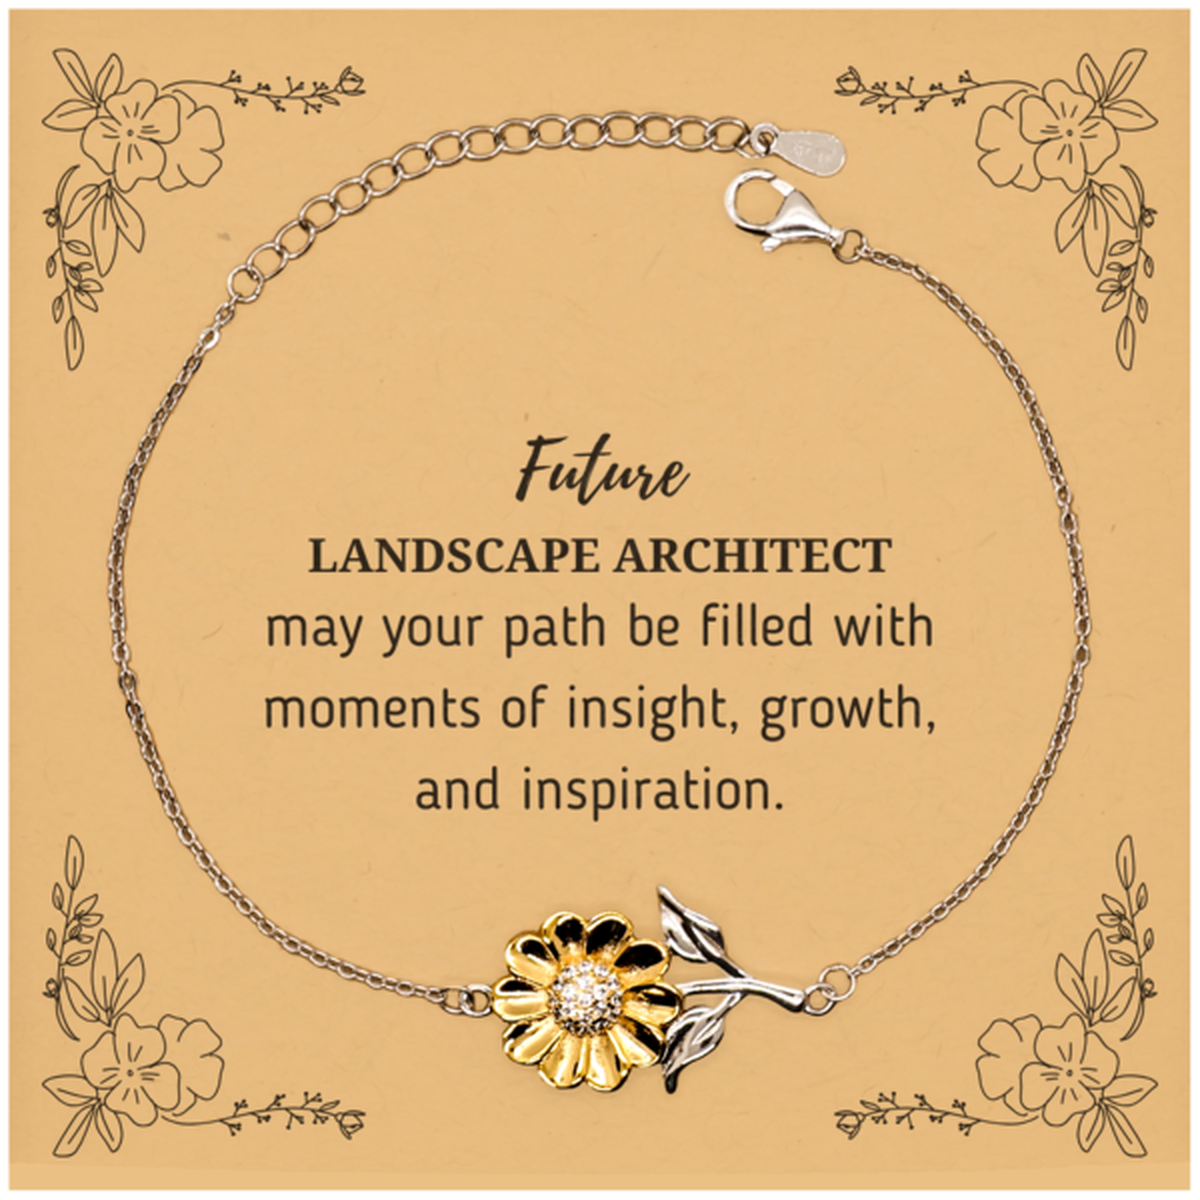 Future Landscape Architect Gifts, May your path be filled with moments of insight, Graduation Gifts for New Landscape Architect, Christmas Unique Sunflower Bracelet For Men, Women, Friends